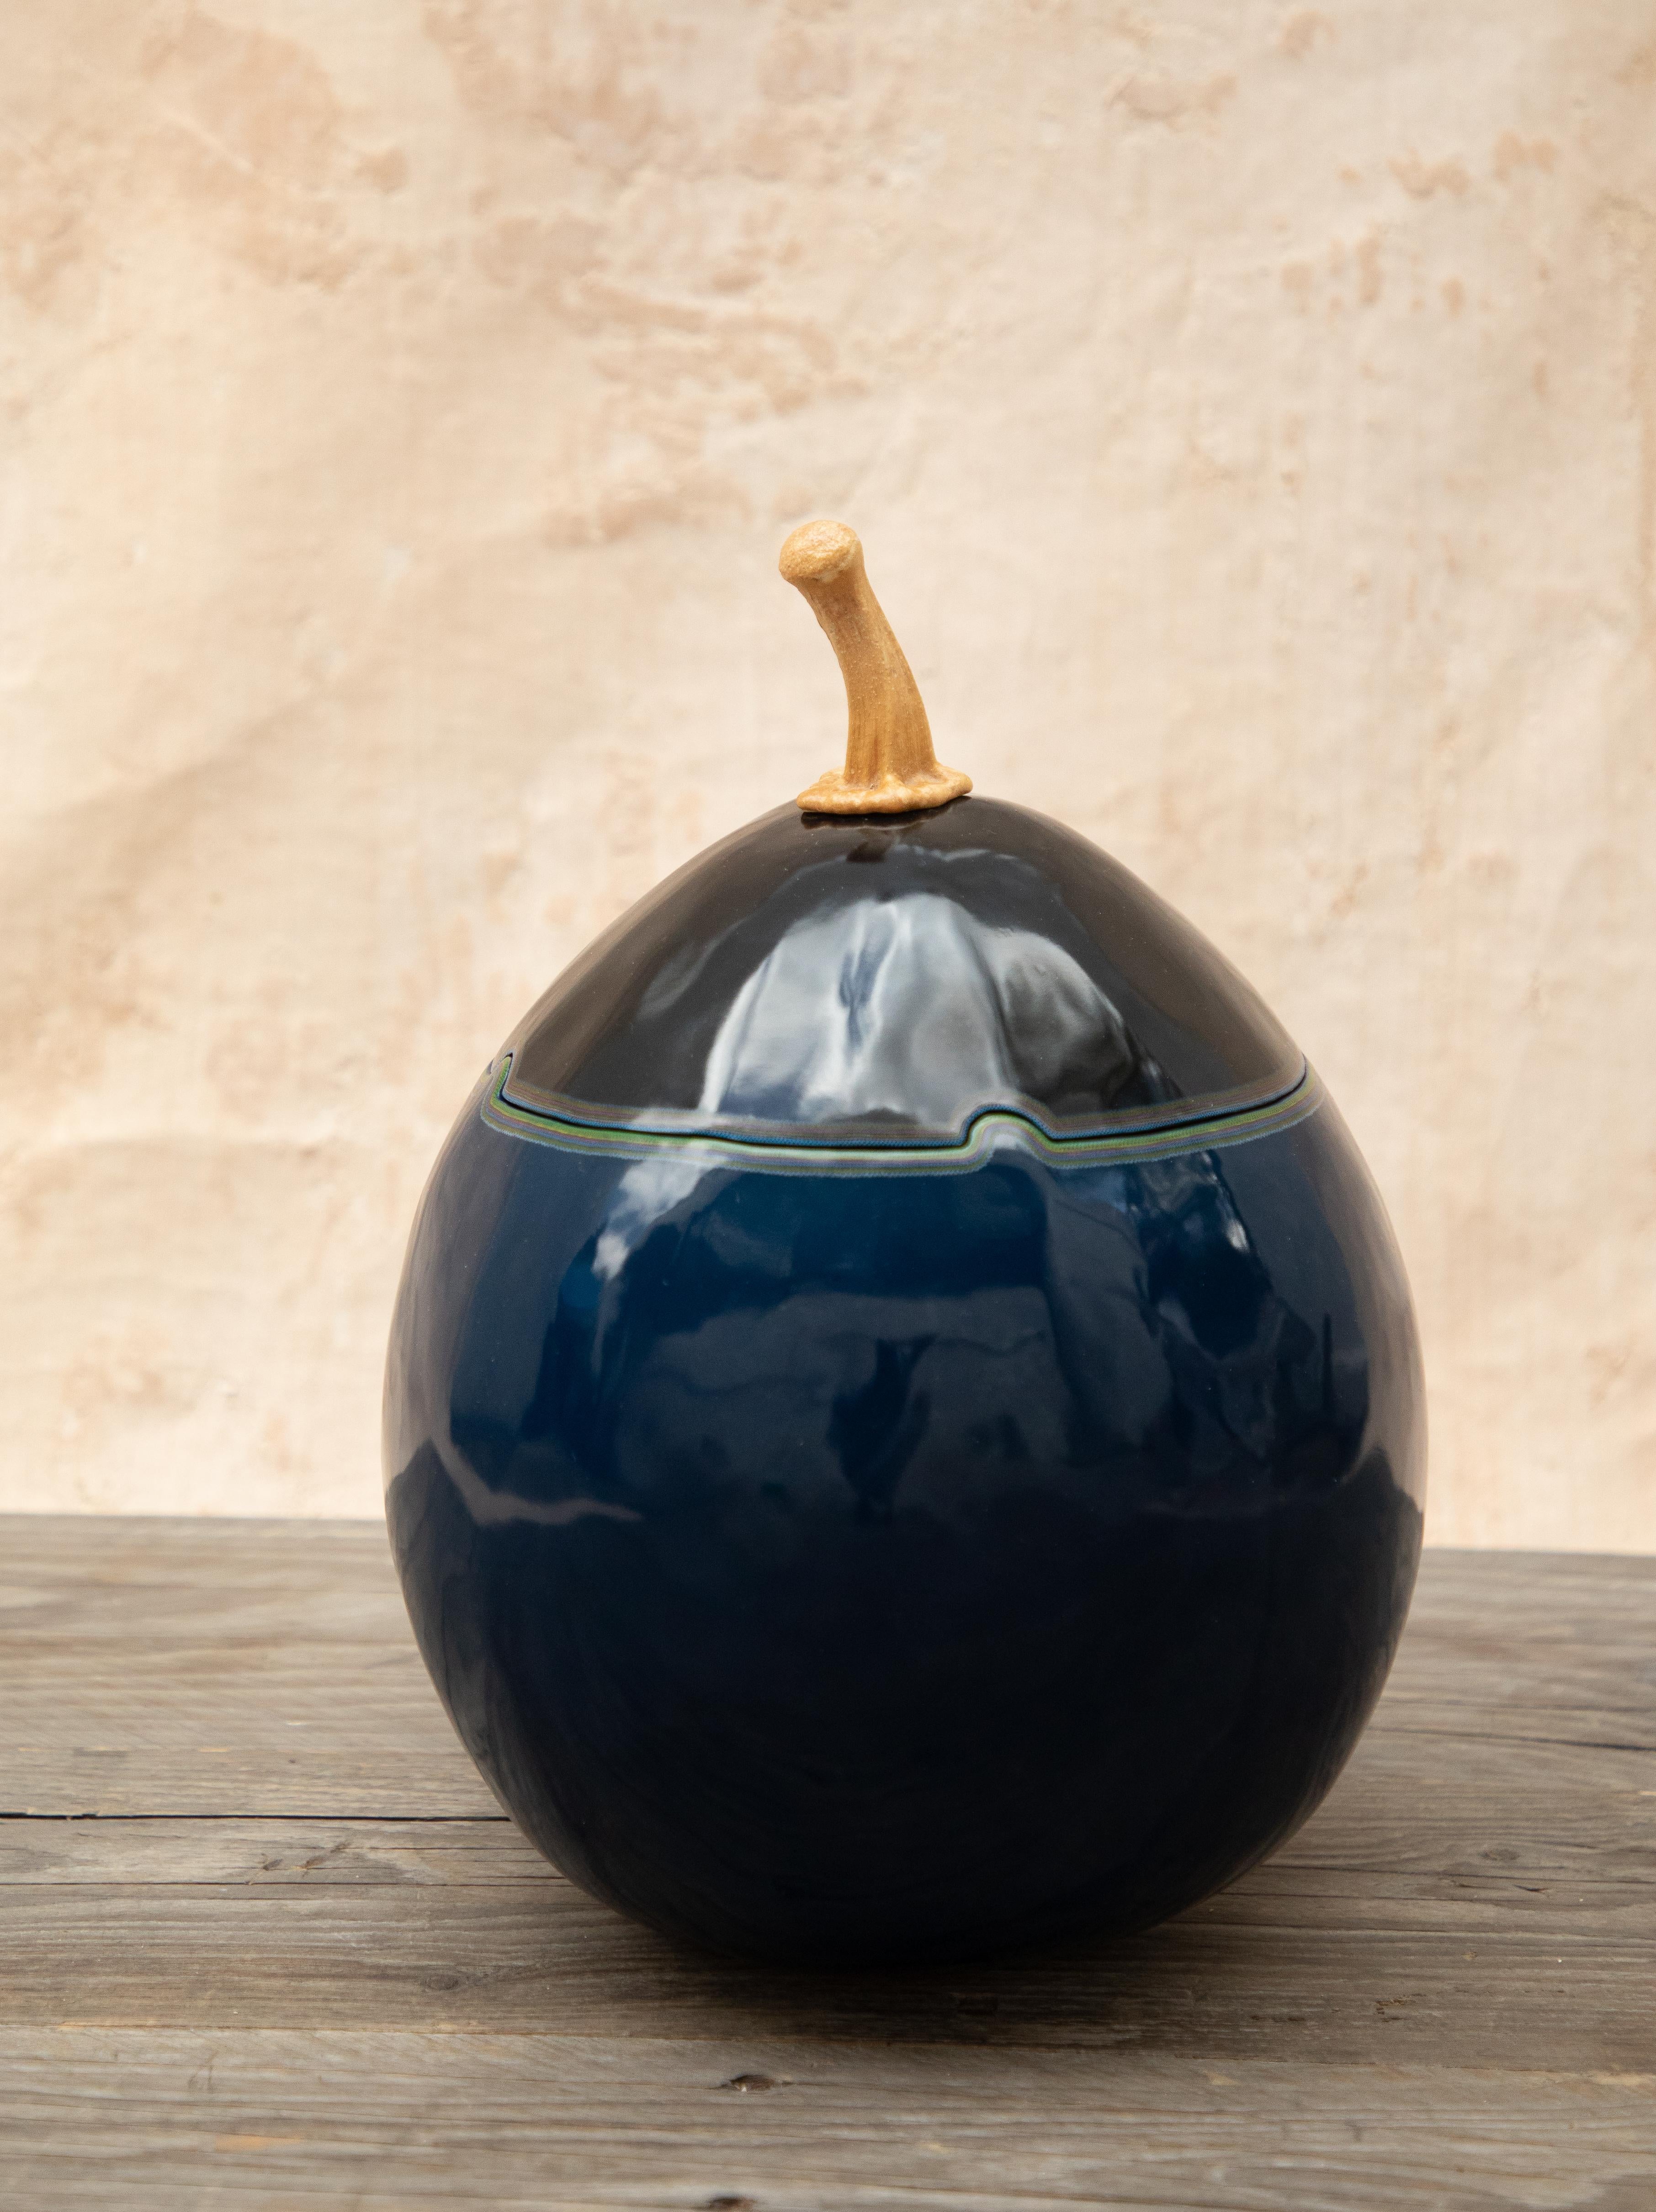 Guaje tema filigrana gourd by Onora
One of a Kind
Dimensions: 40 cm
Materials: Gourd, natural pigments mixed with chia oil and then hand burnished with river stones

Collection gourd lacquered by master Florentino Vázquez from Guerrero. These